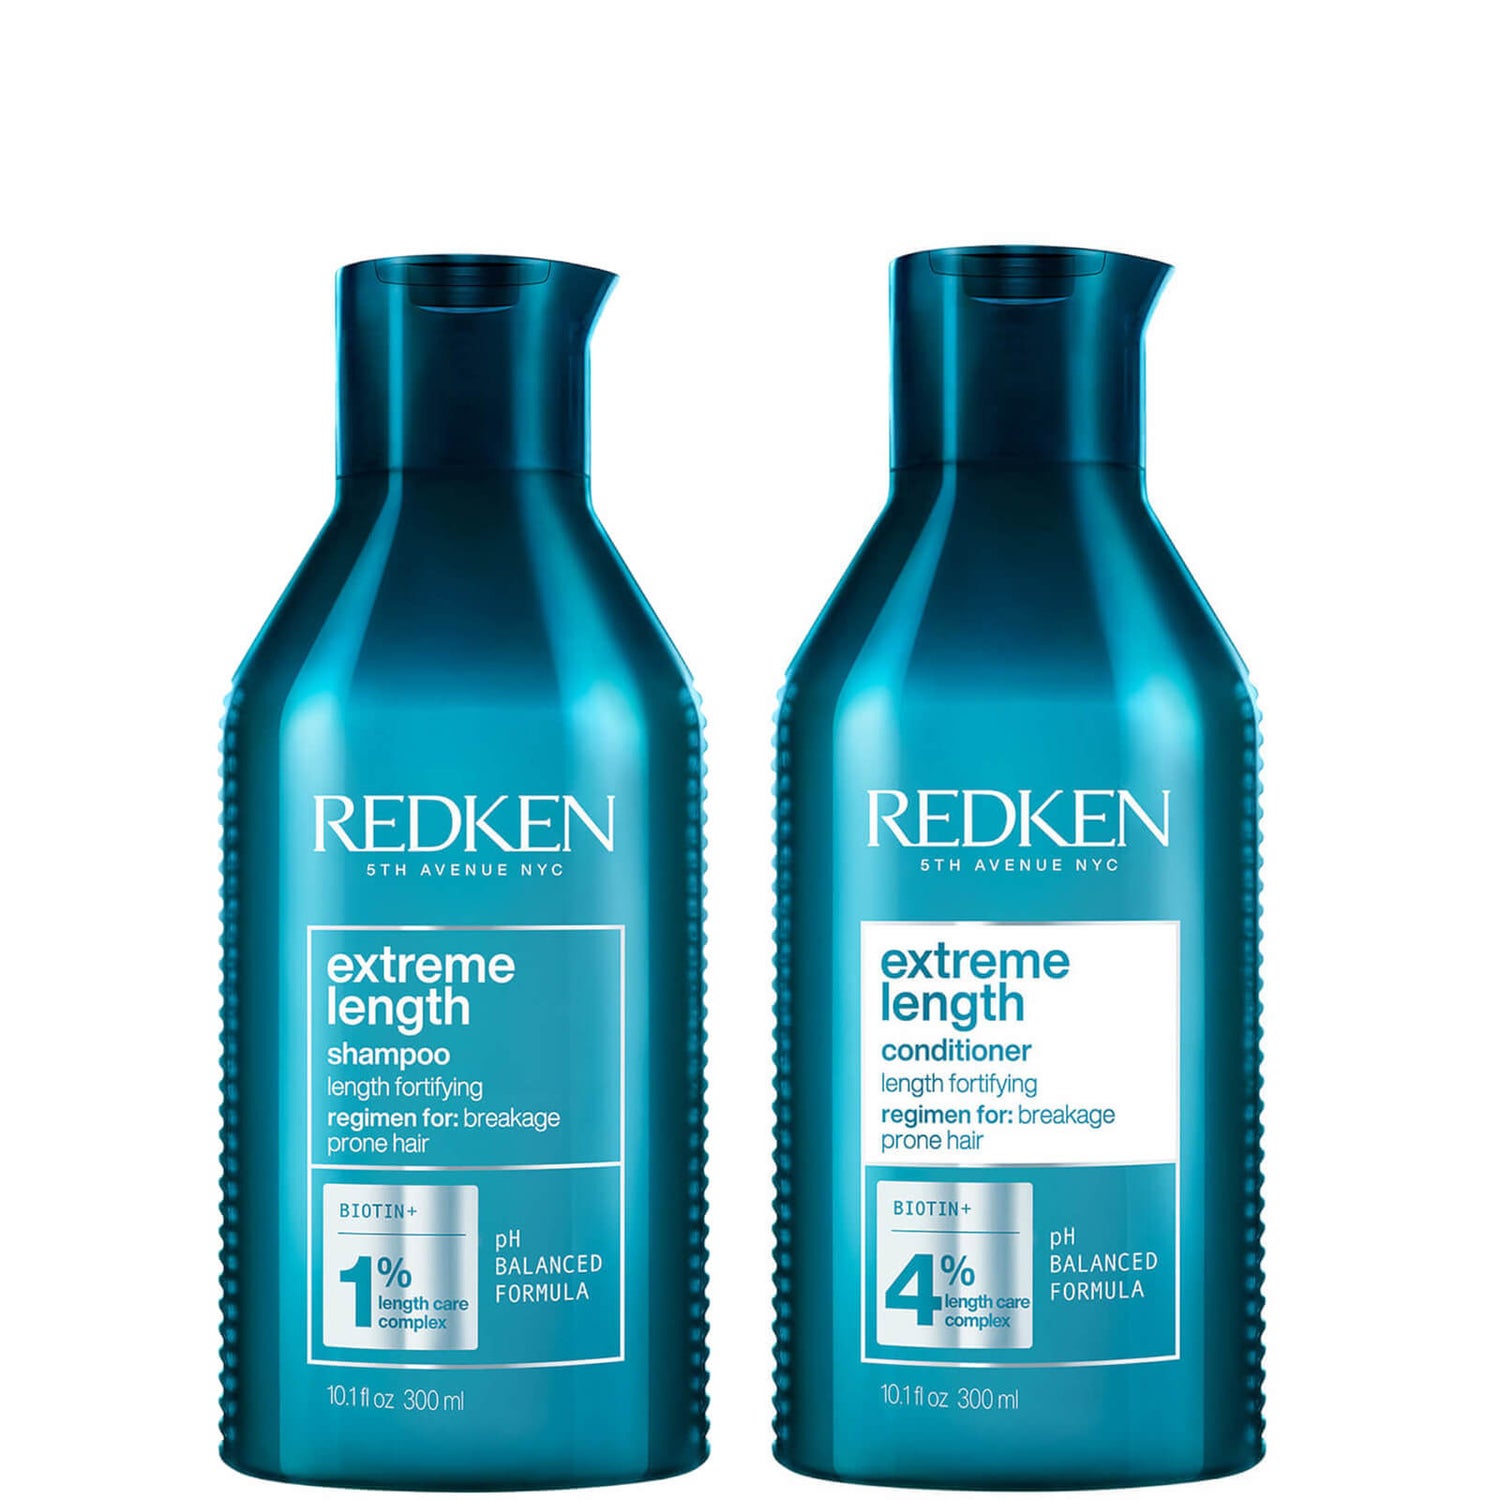 Redken Extreme Length Shampoo and Conditioner Duo (Worth $92.00)